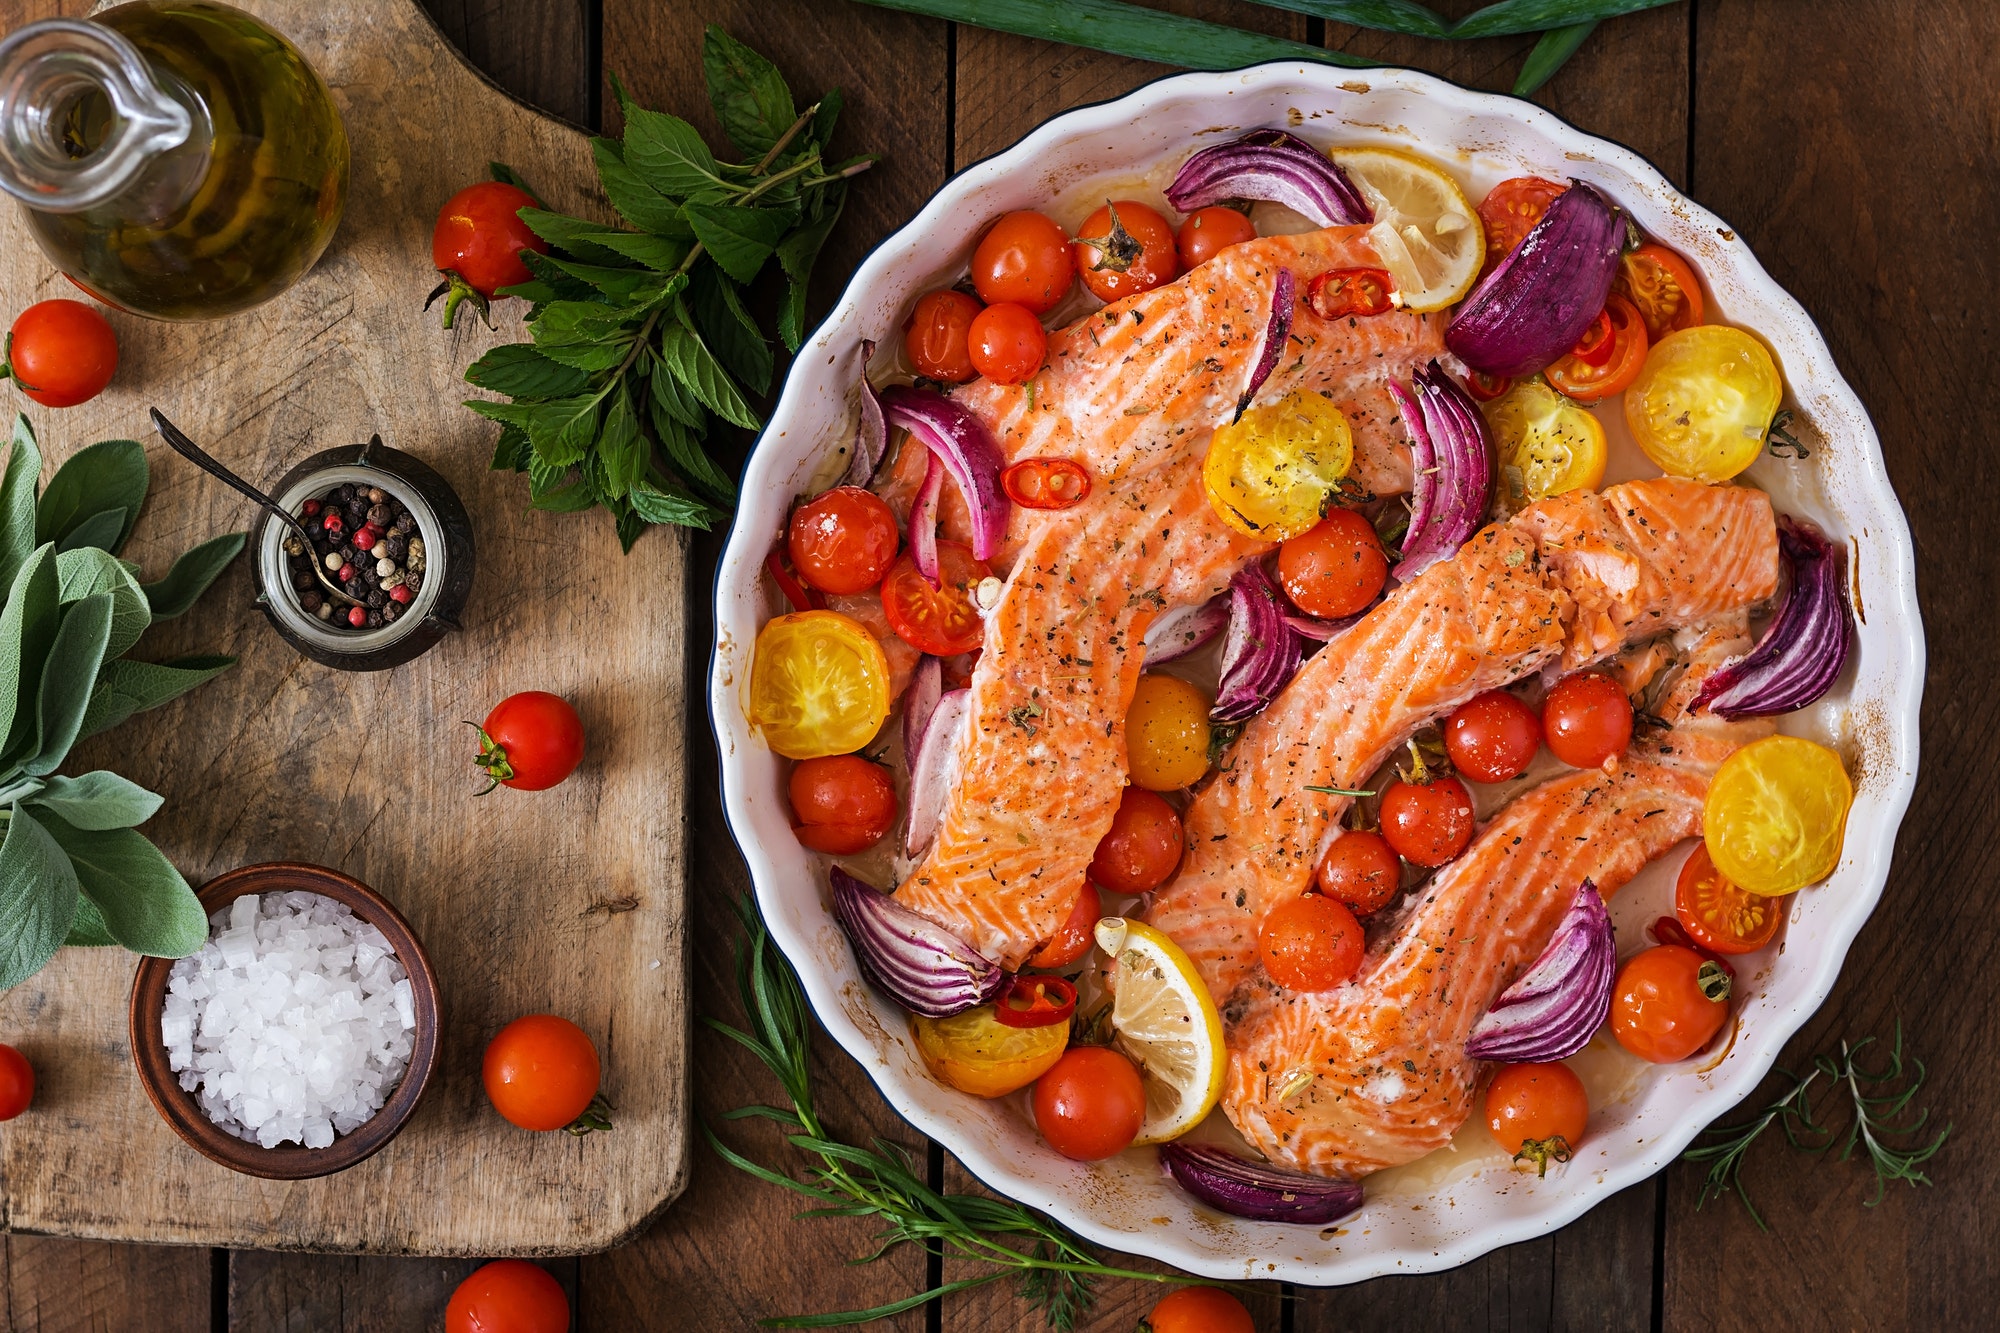 Baked salmon fillet with tomatoes, red onions and spices. Diet menu.